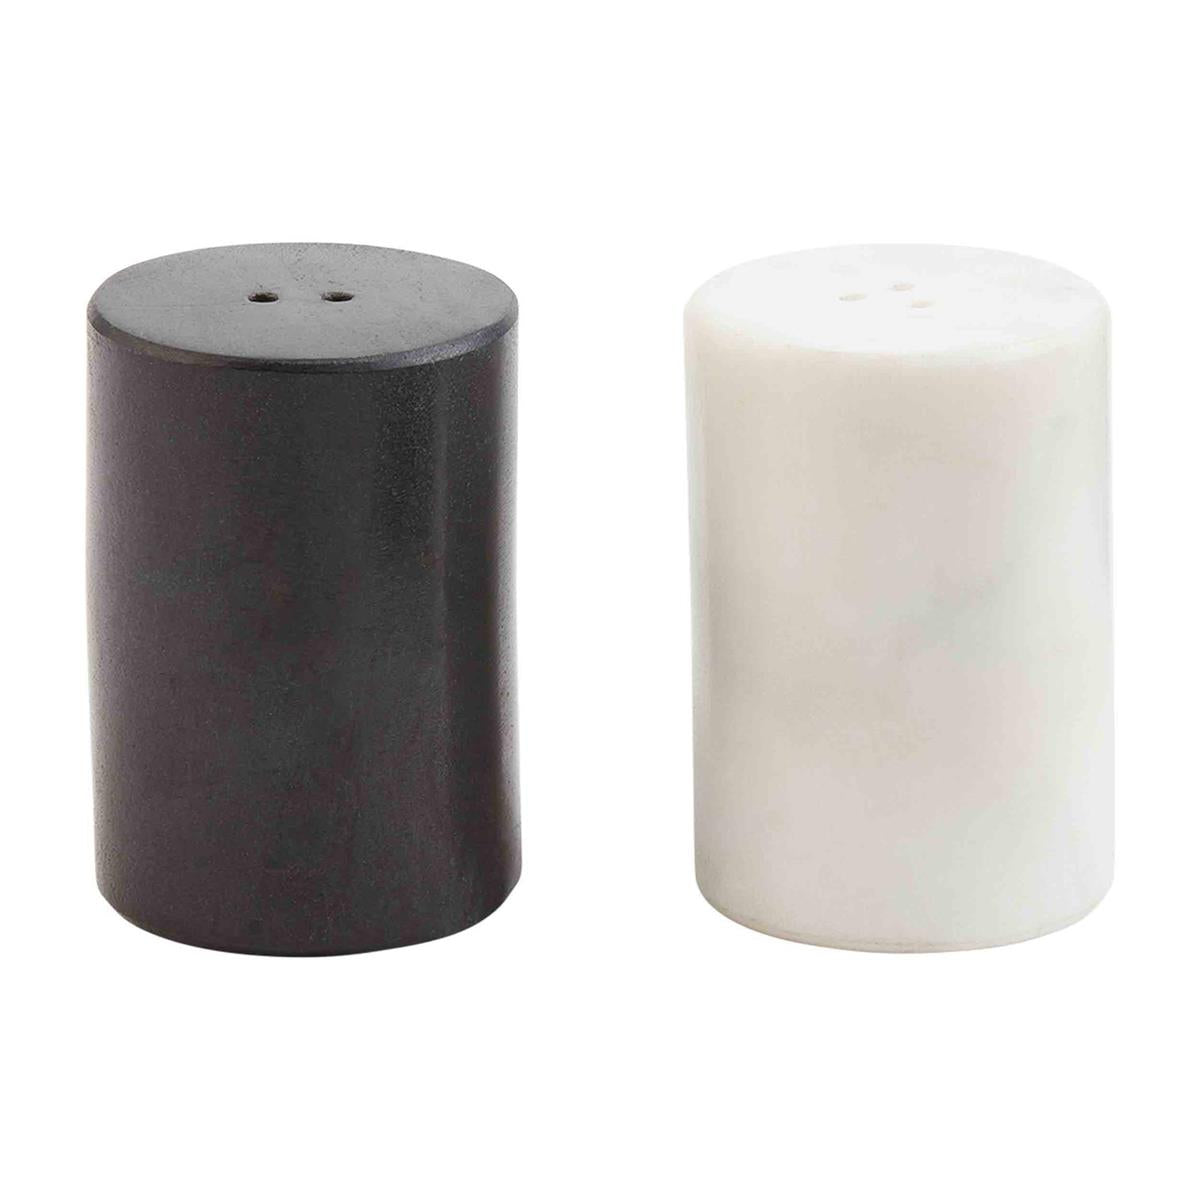 Mudpie MARBLE BLACK AND WHITE SALT & PEPPER SHAKERS